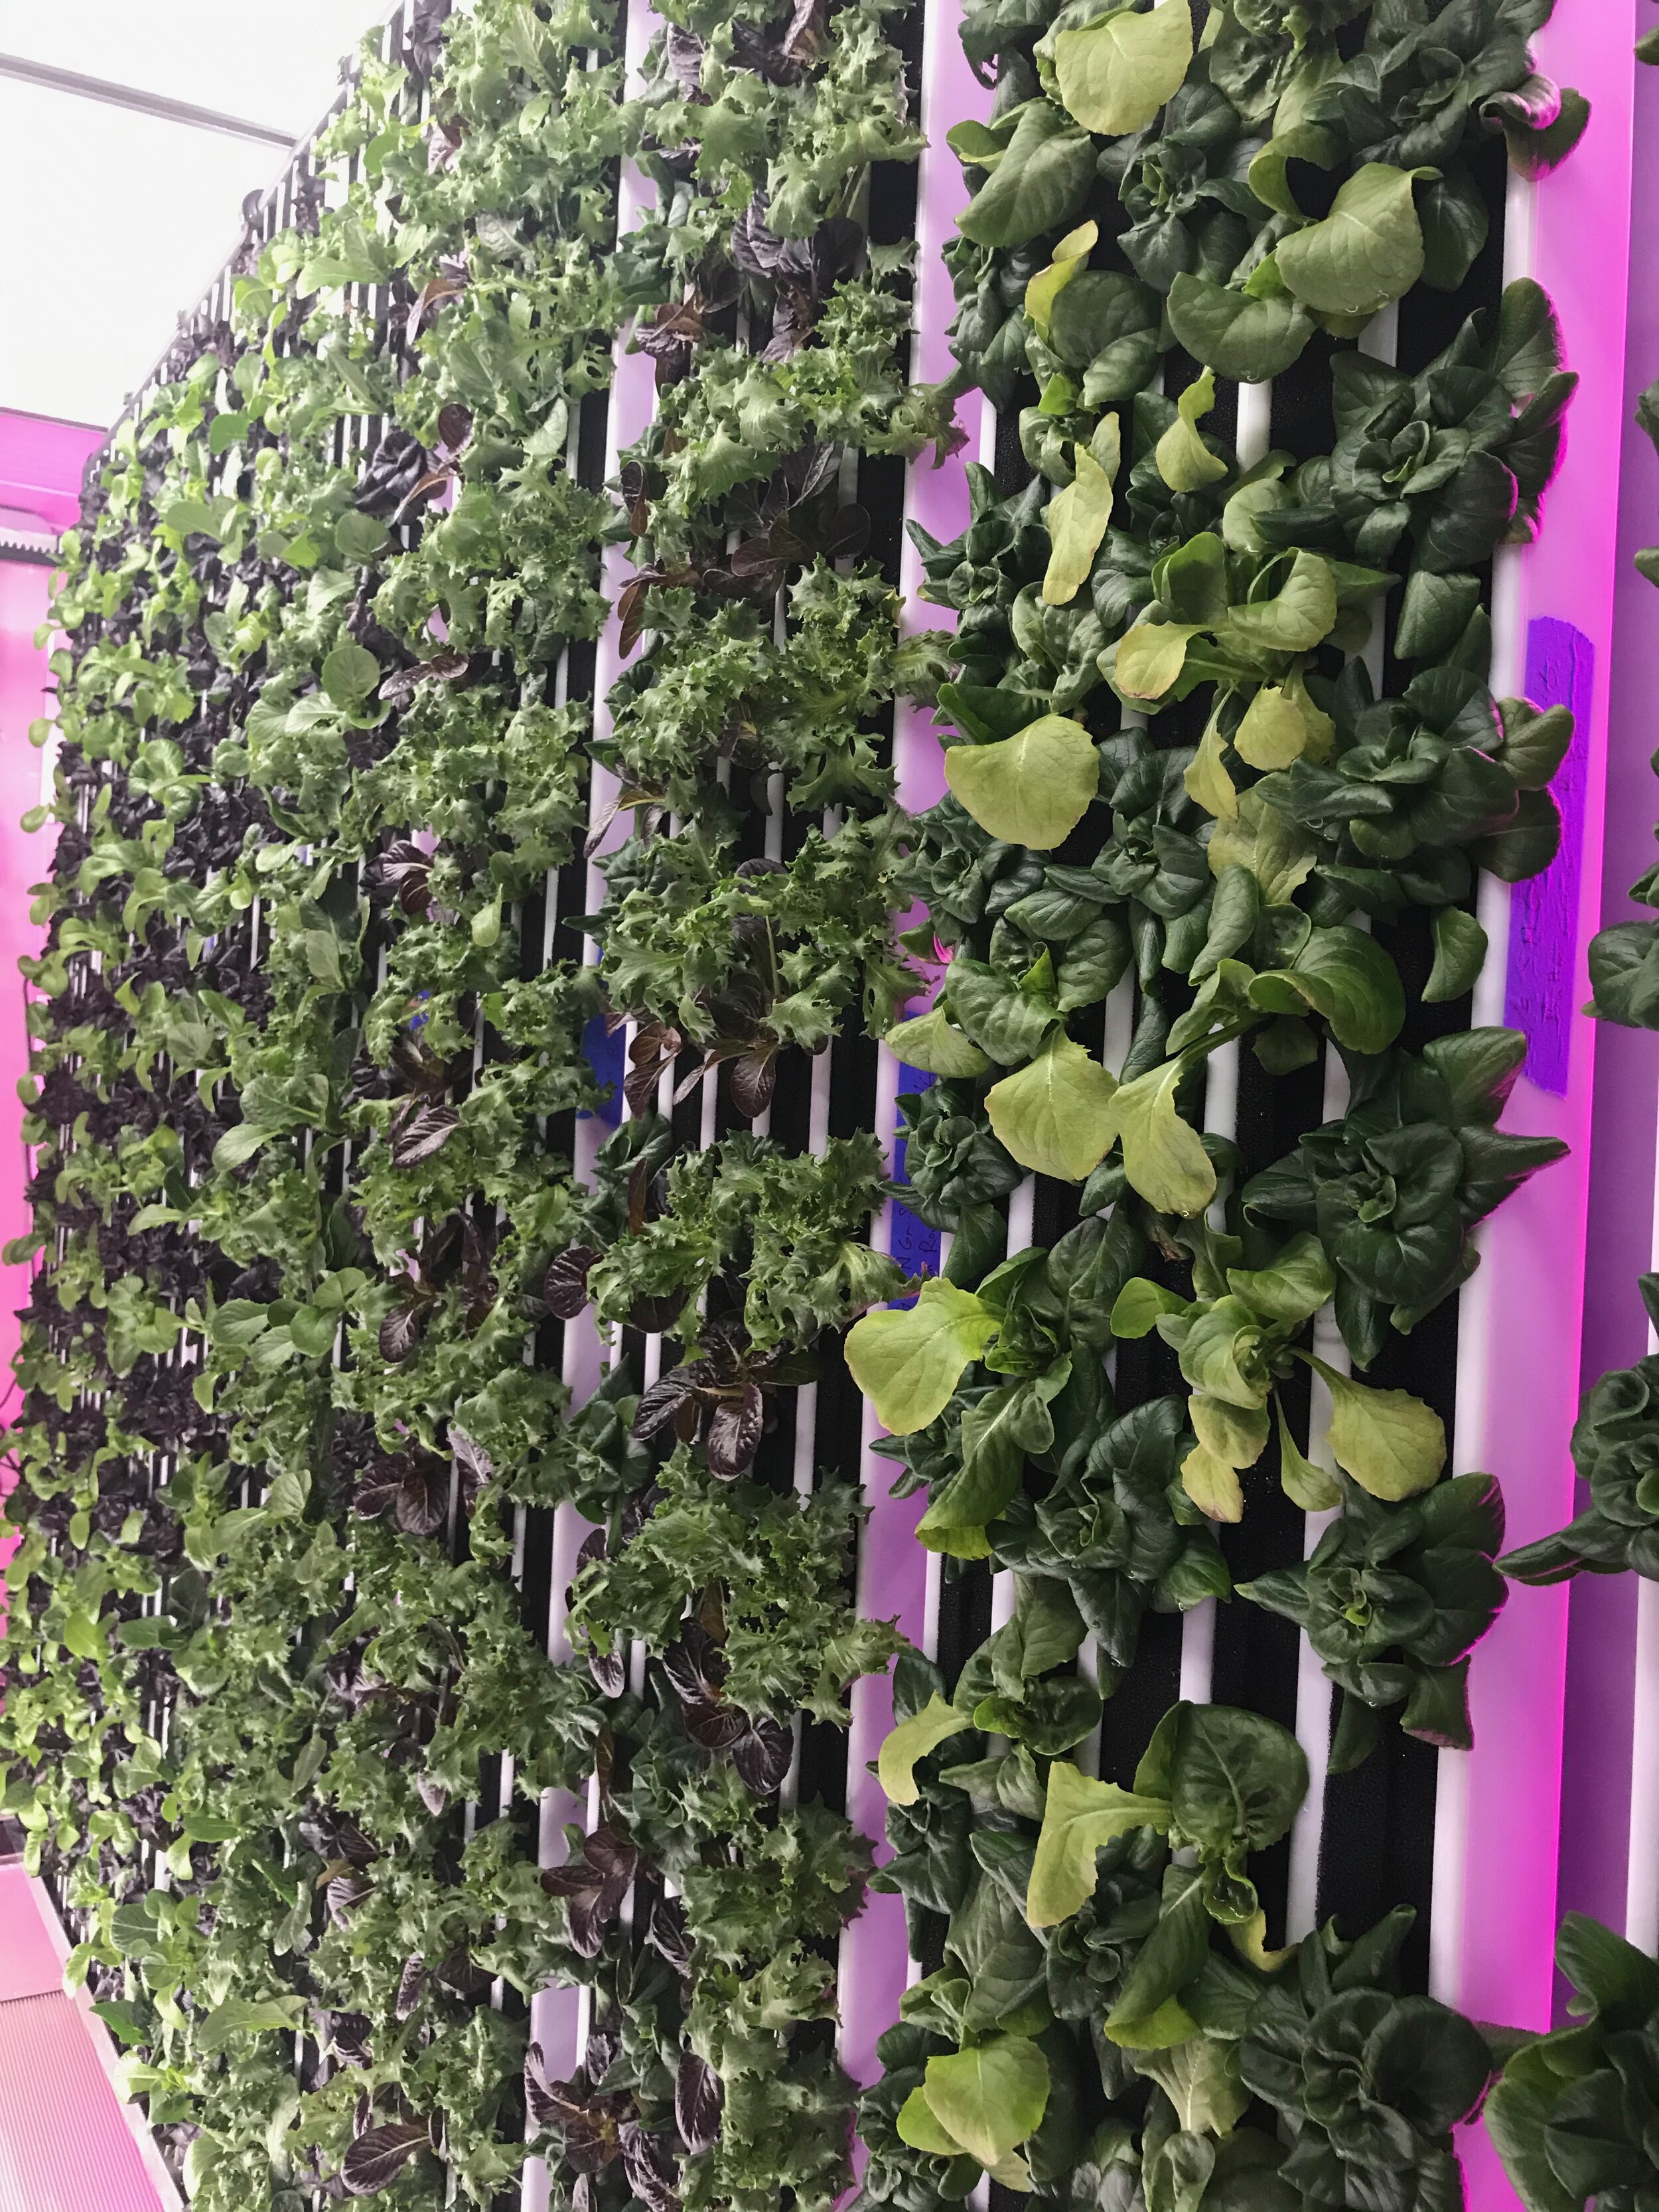 towers-right-Hydroponic-Shipping-Container-Farm-Complete-Hydroponic Systems-Commercial-Vertical-Hydroponic-Systems-Pre-Owned-Freight-Farm-Greenery.jpg